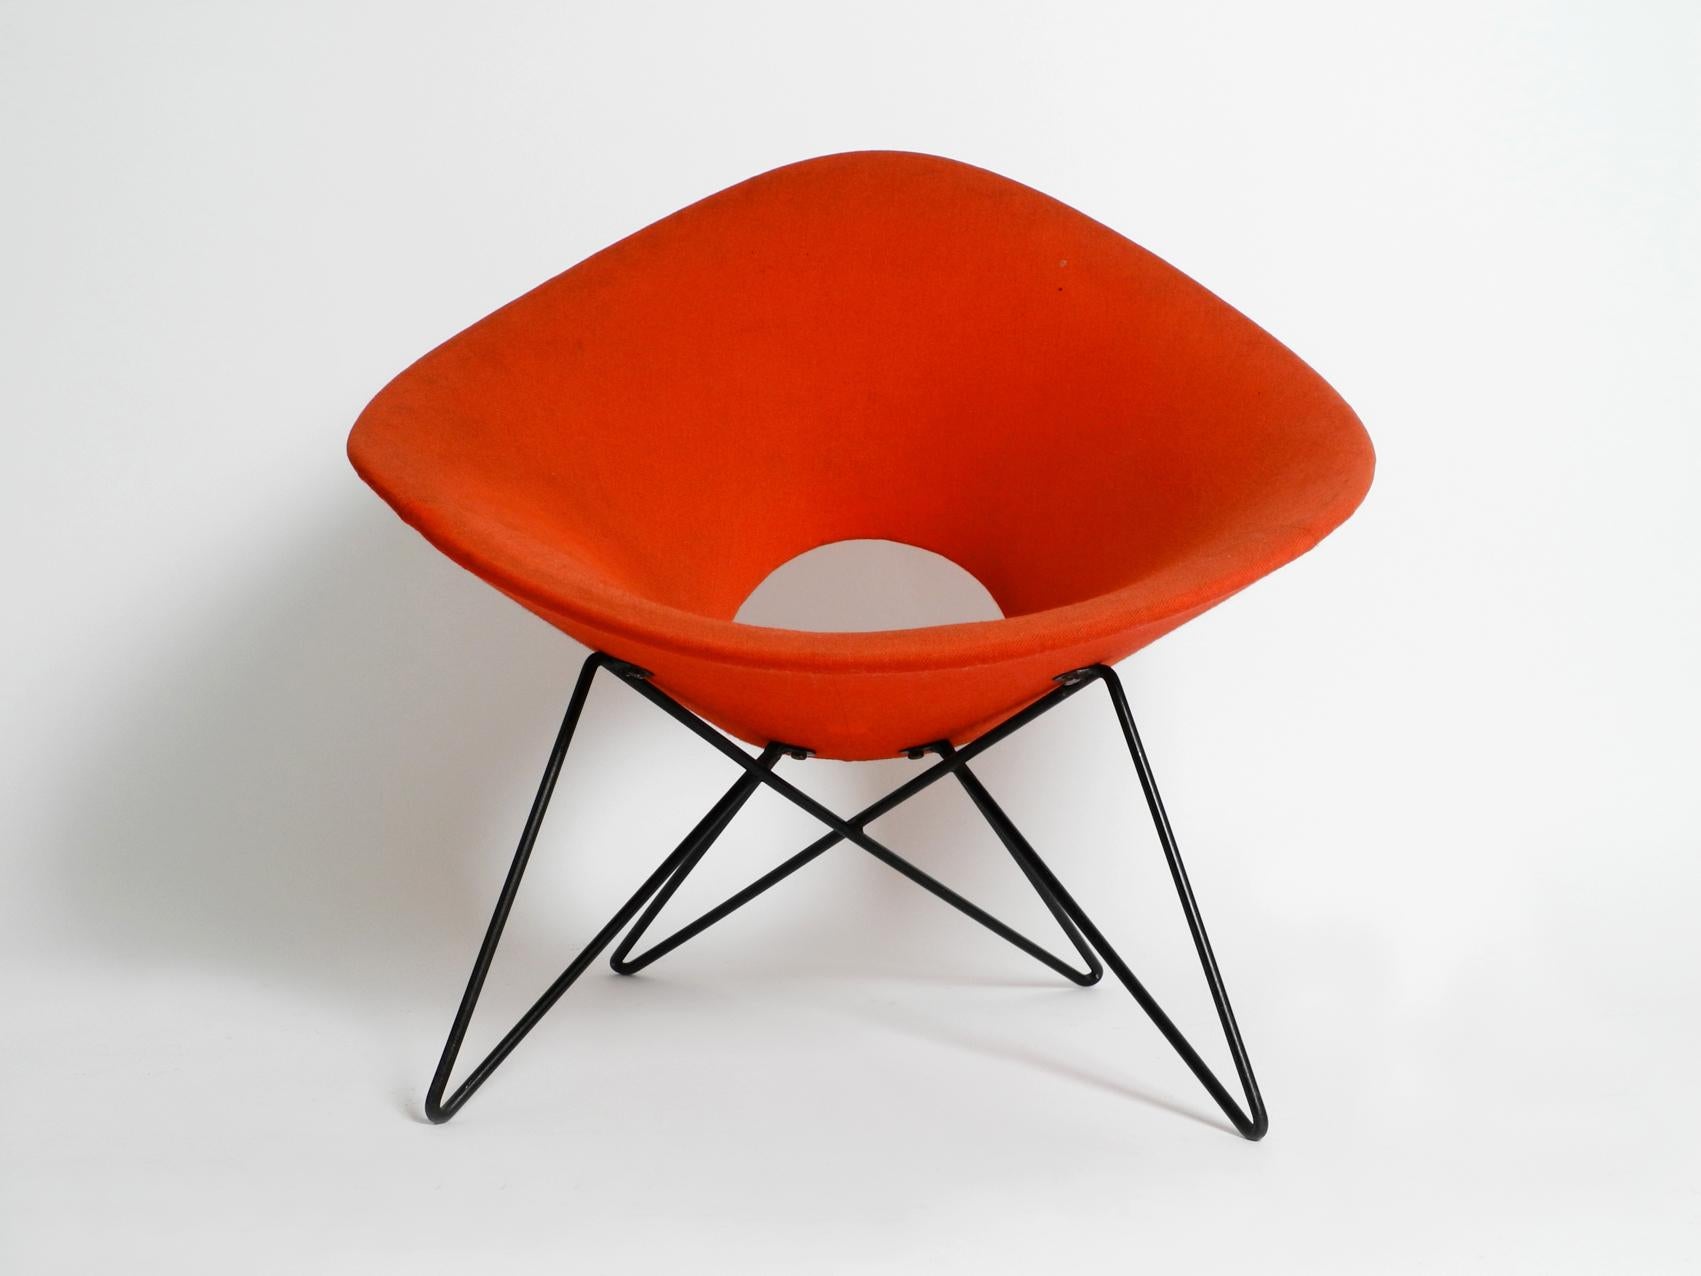 Mid-20th Century Italian Midcentury Lounge Chair with Original Fabric Cover and Hairpin Foot